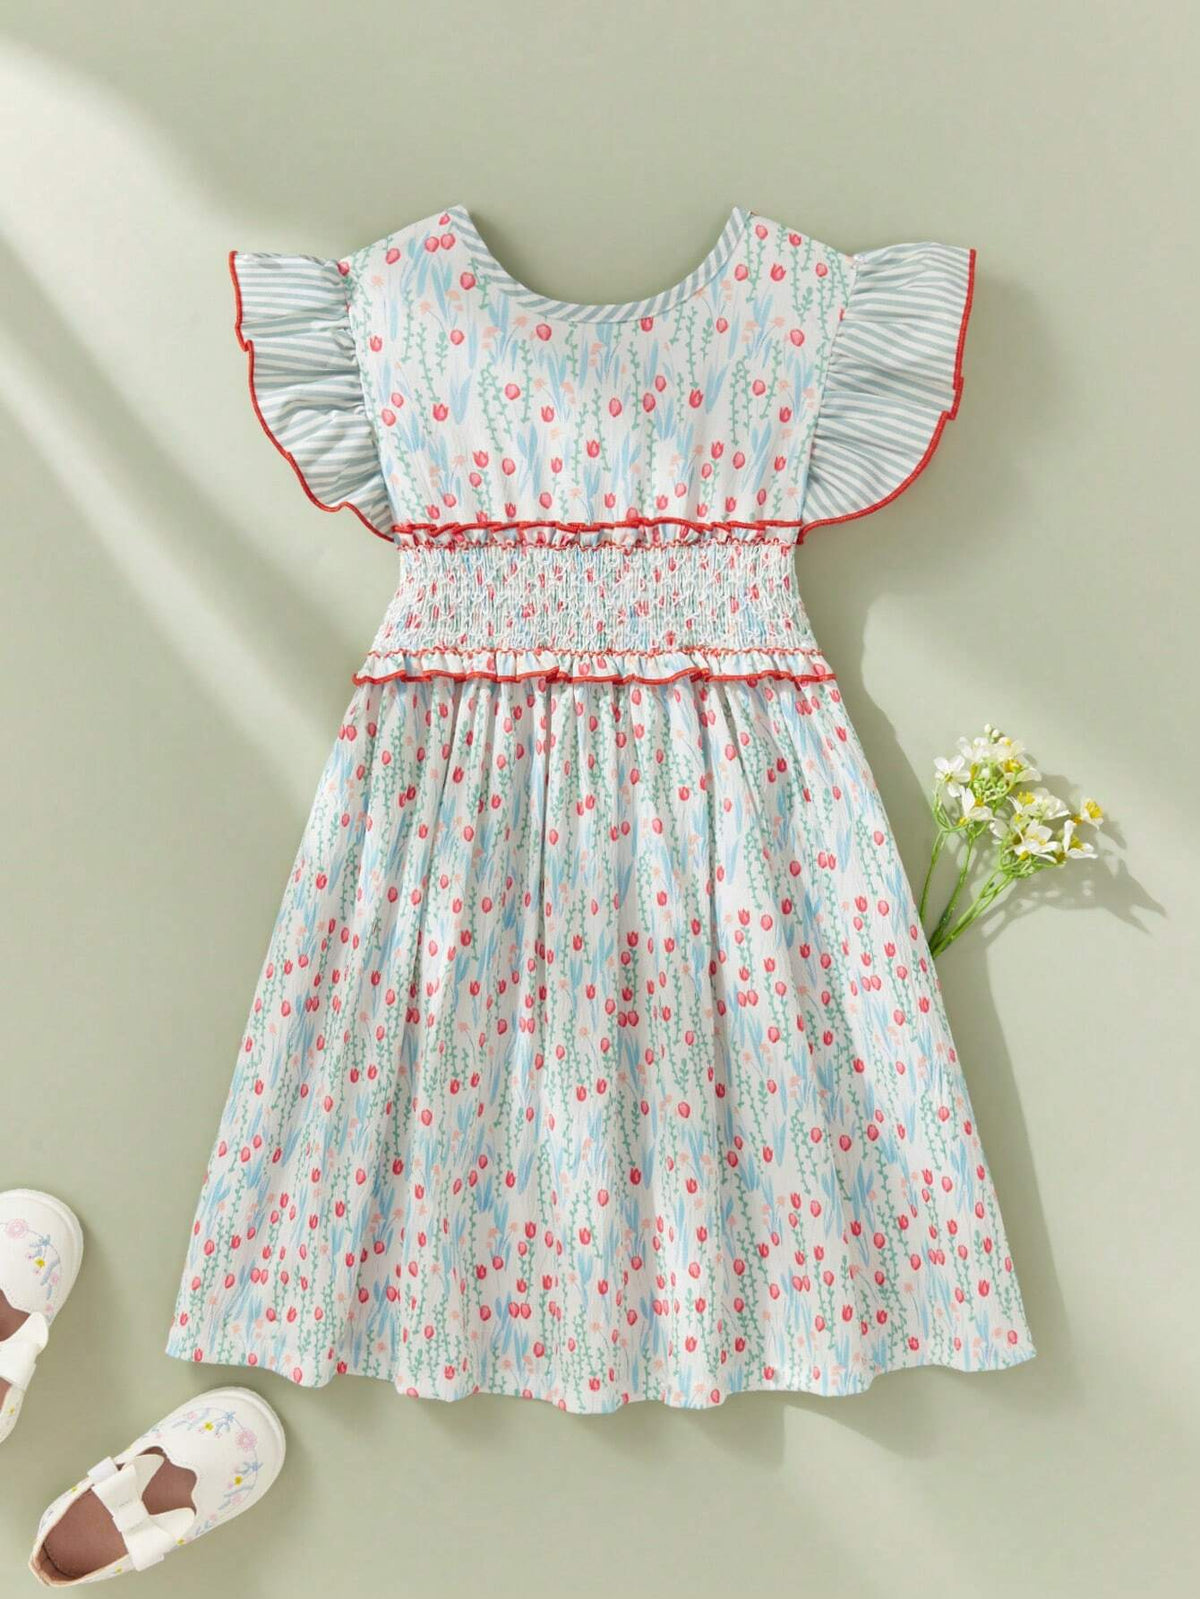 Young Girls' Ladylike Floral Dress